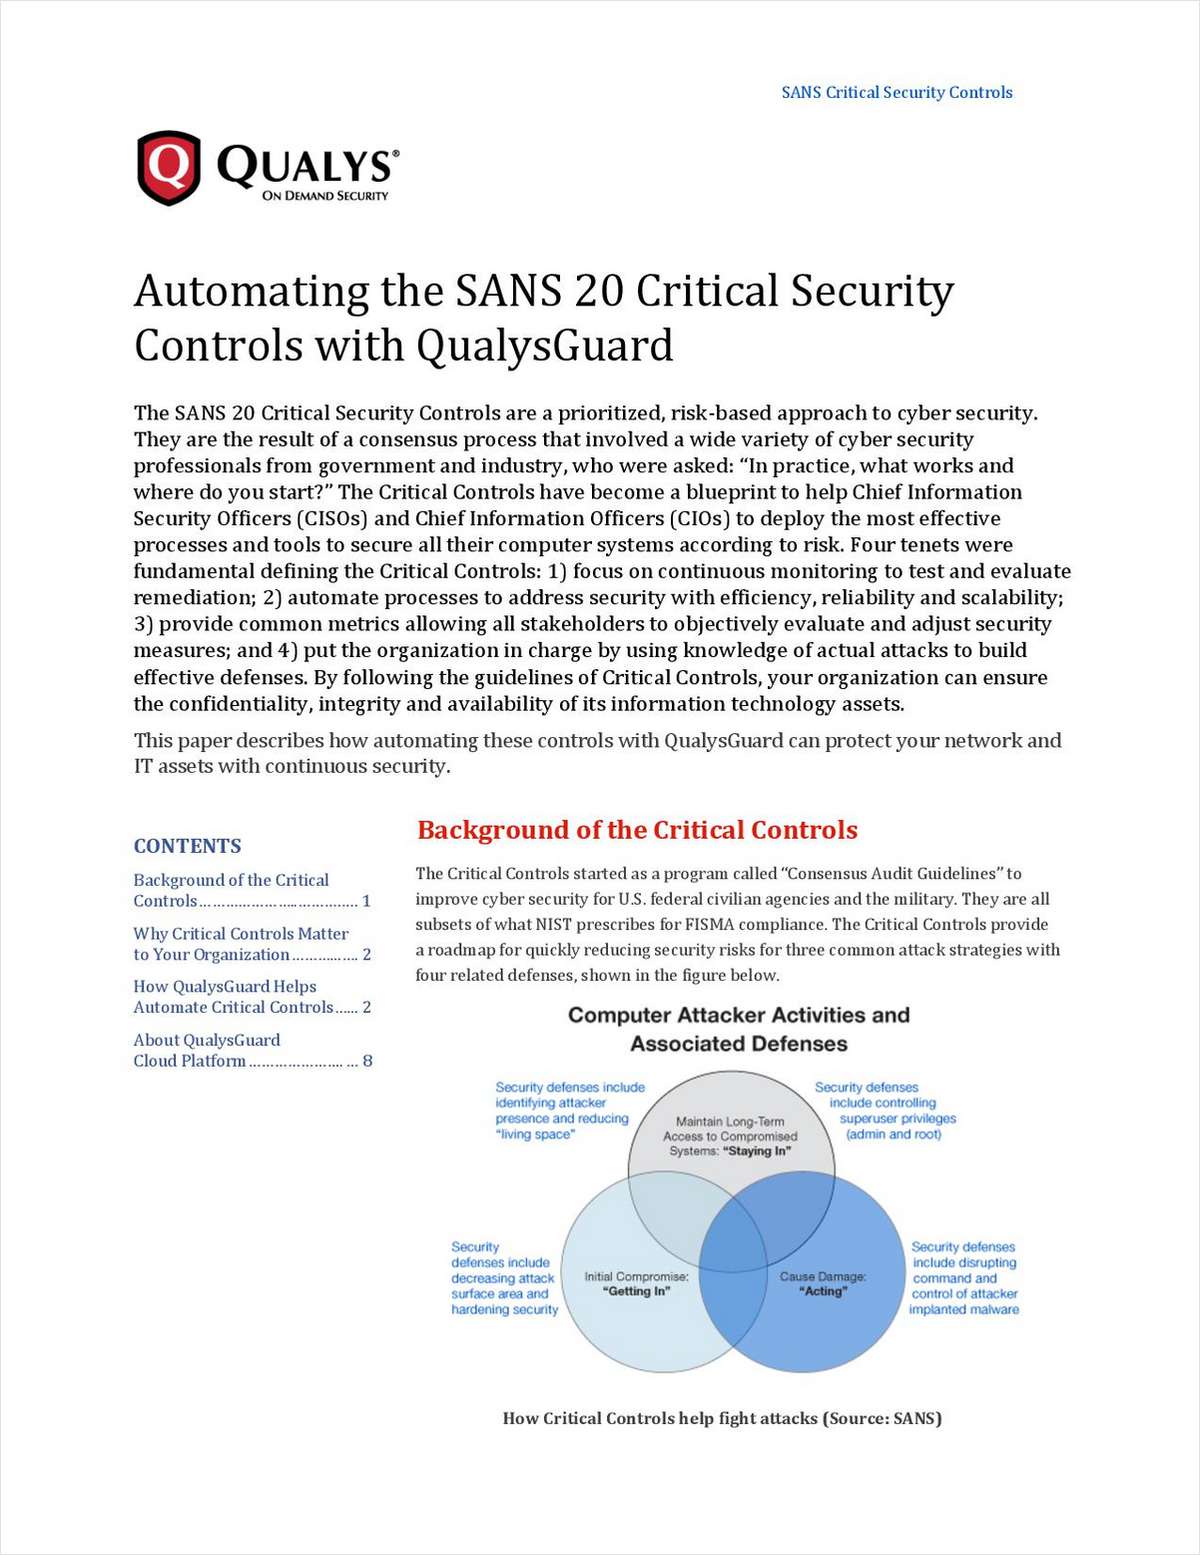 Automating the SANS 20 Critical Security Controls with QualysGuard